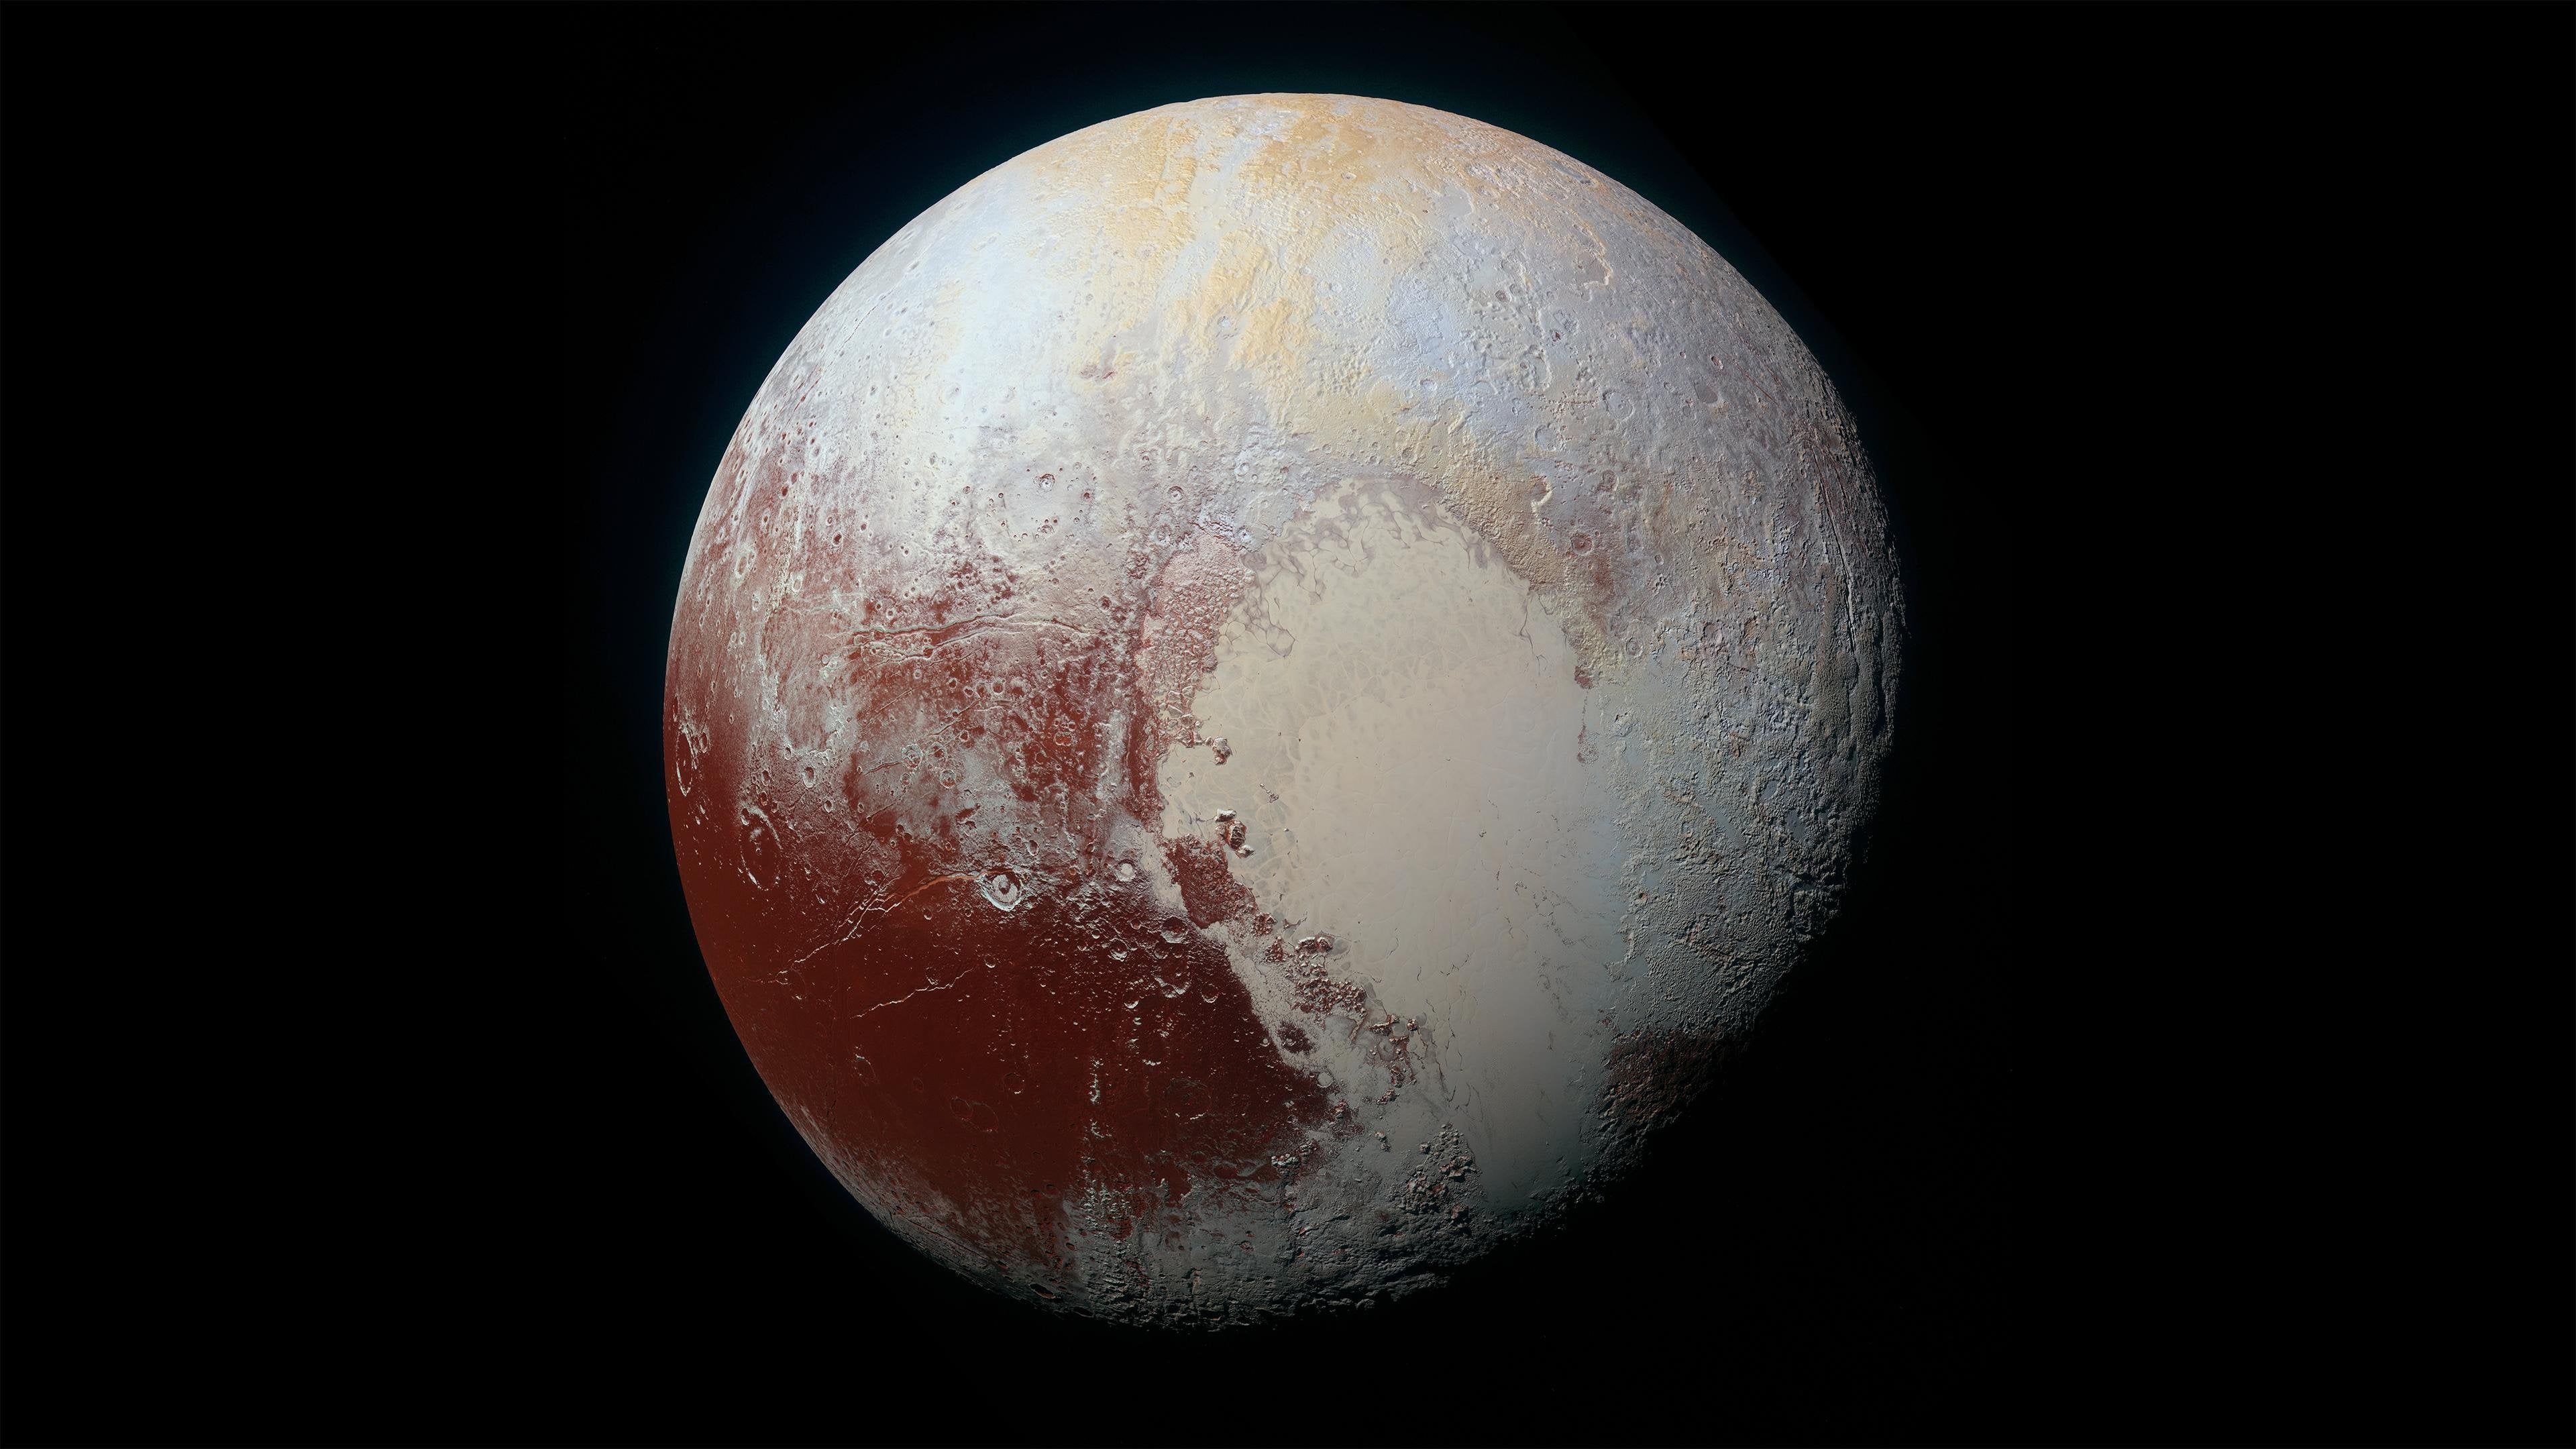 This image of Pluto is gorgeous as a wallpaper with the AMOLED